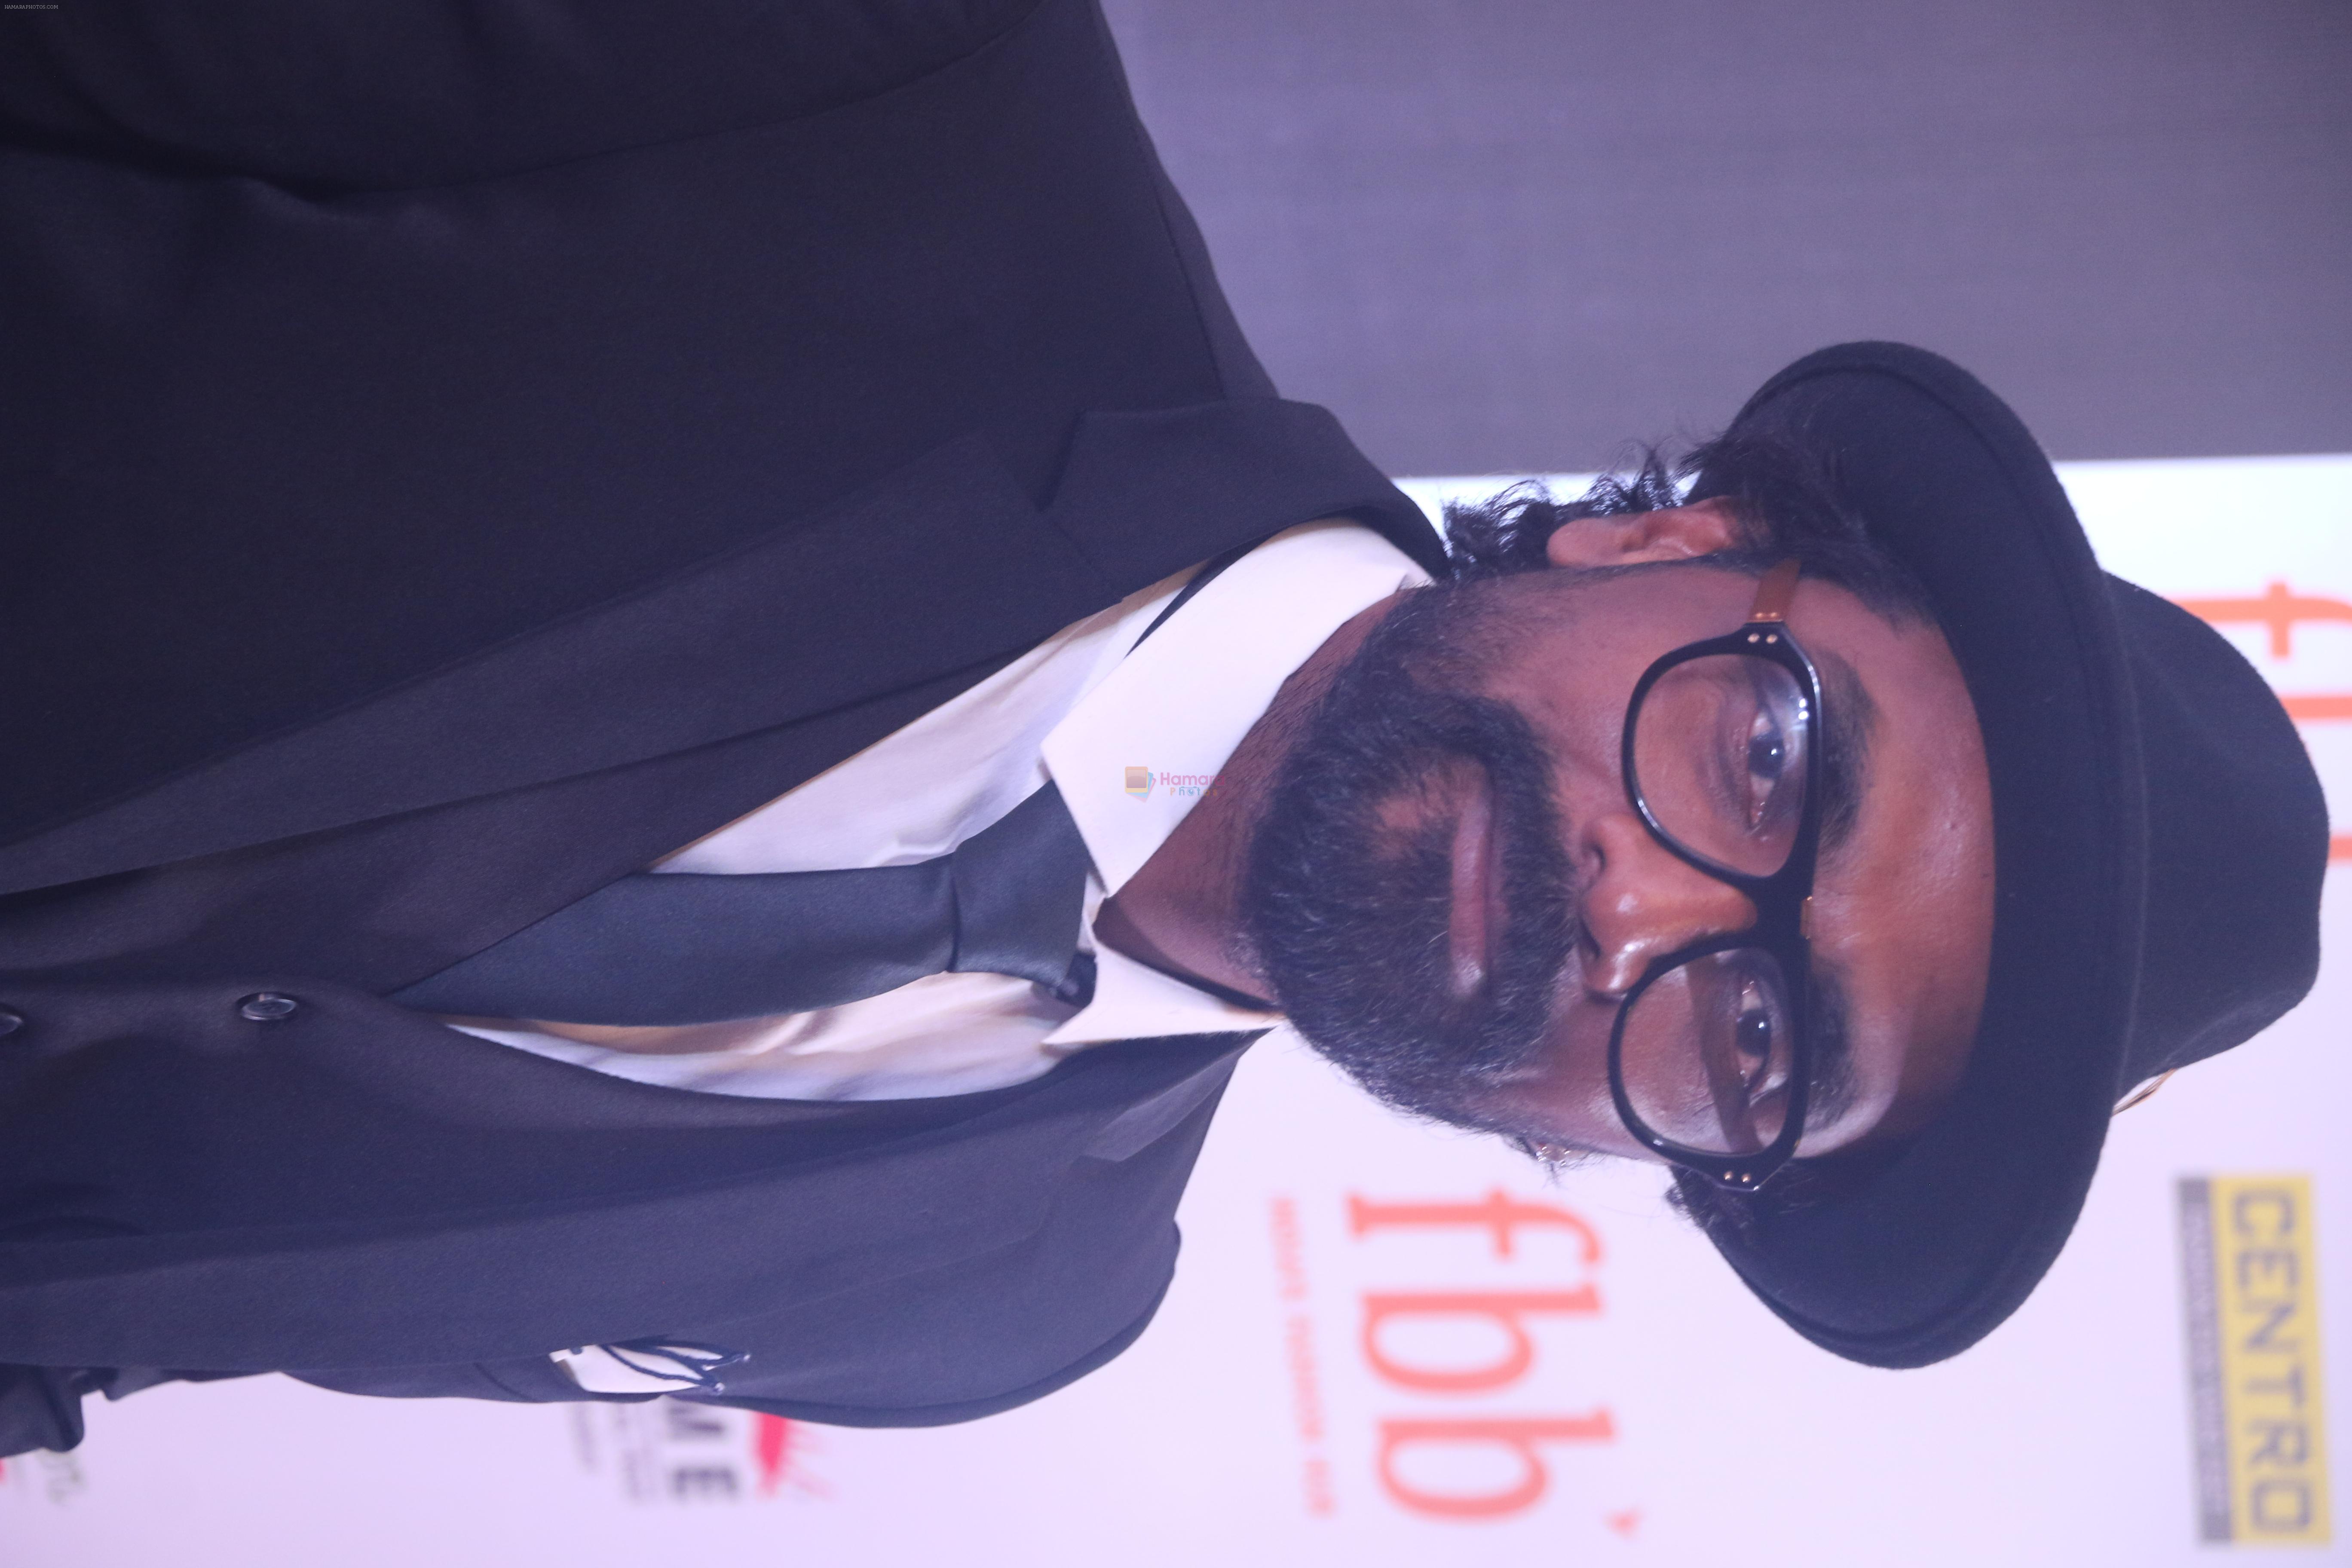 Remo D Souza at the Grand Finale of Femina Miss India in NSCI worli on 15th June 2019